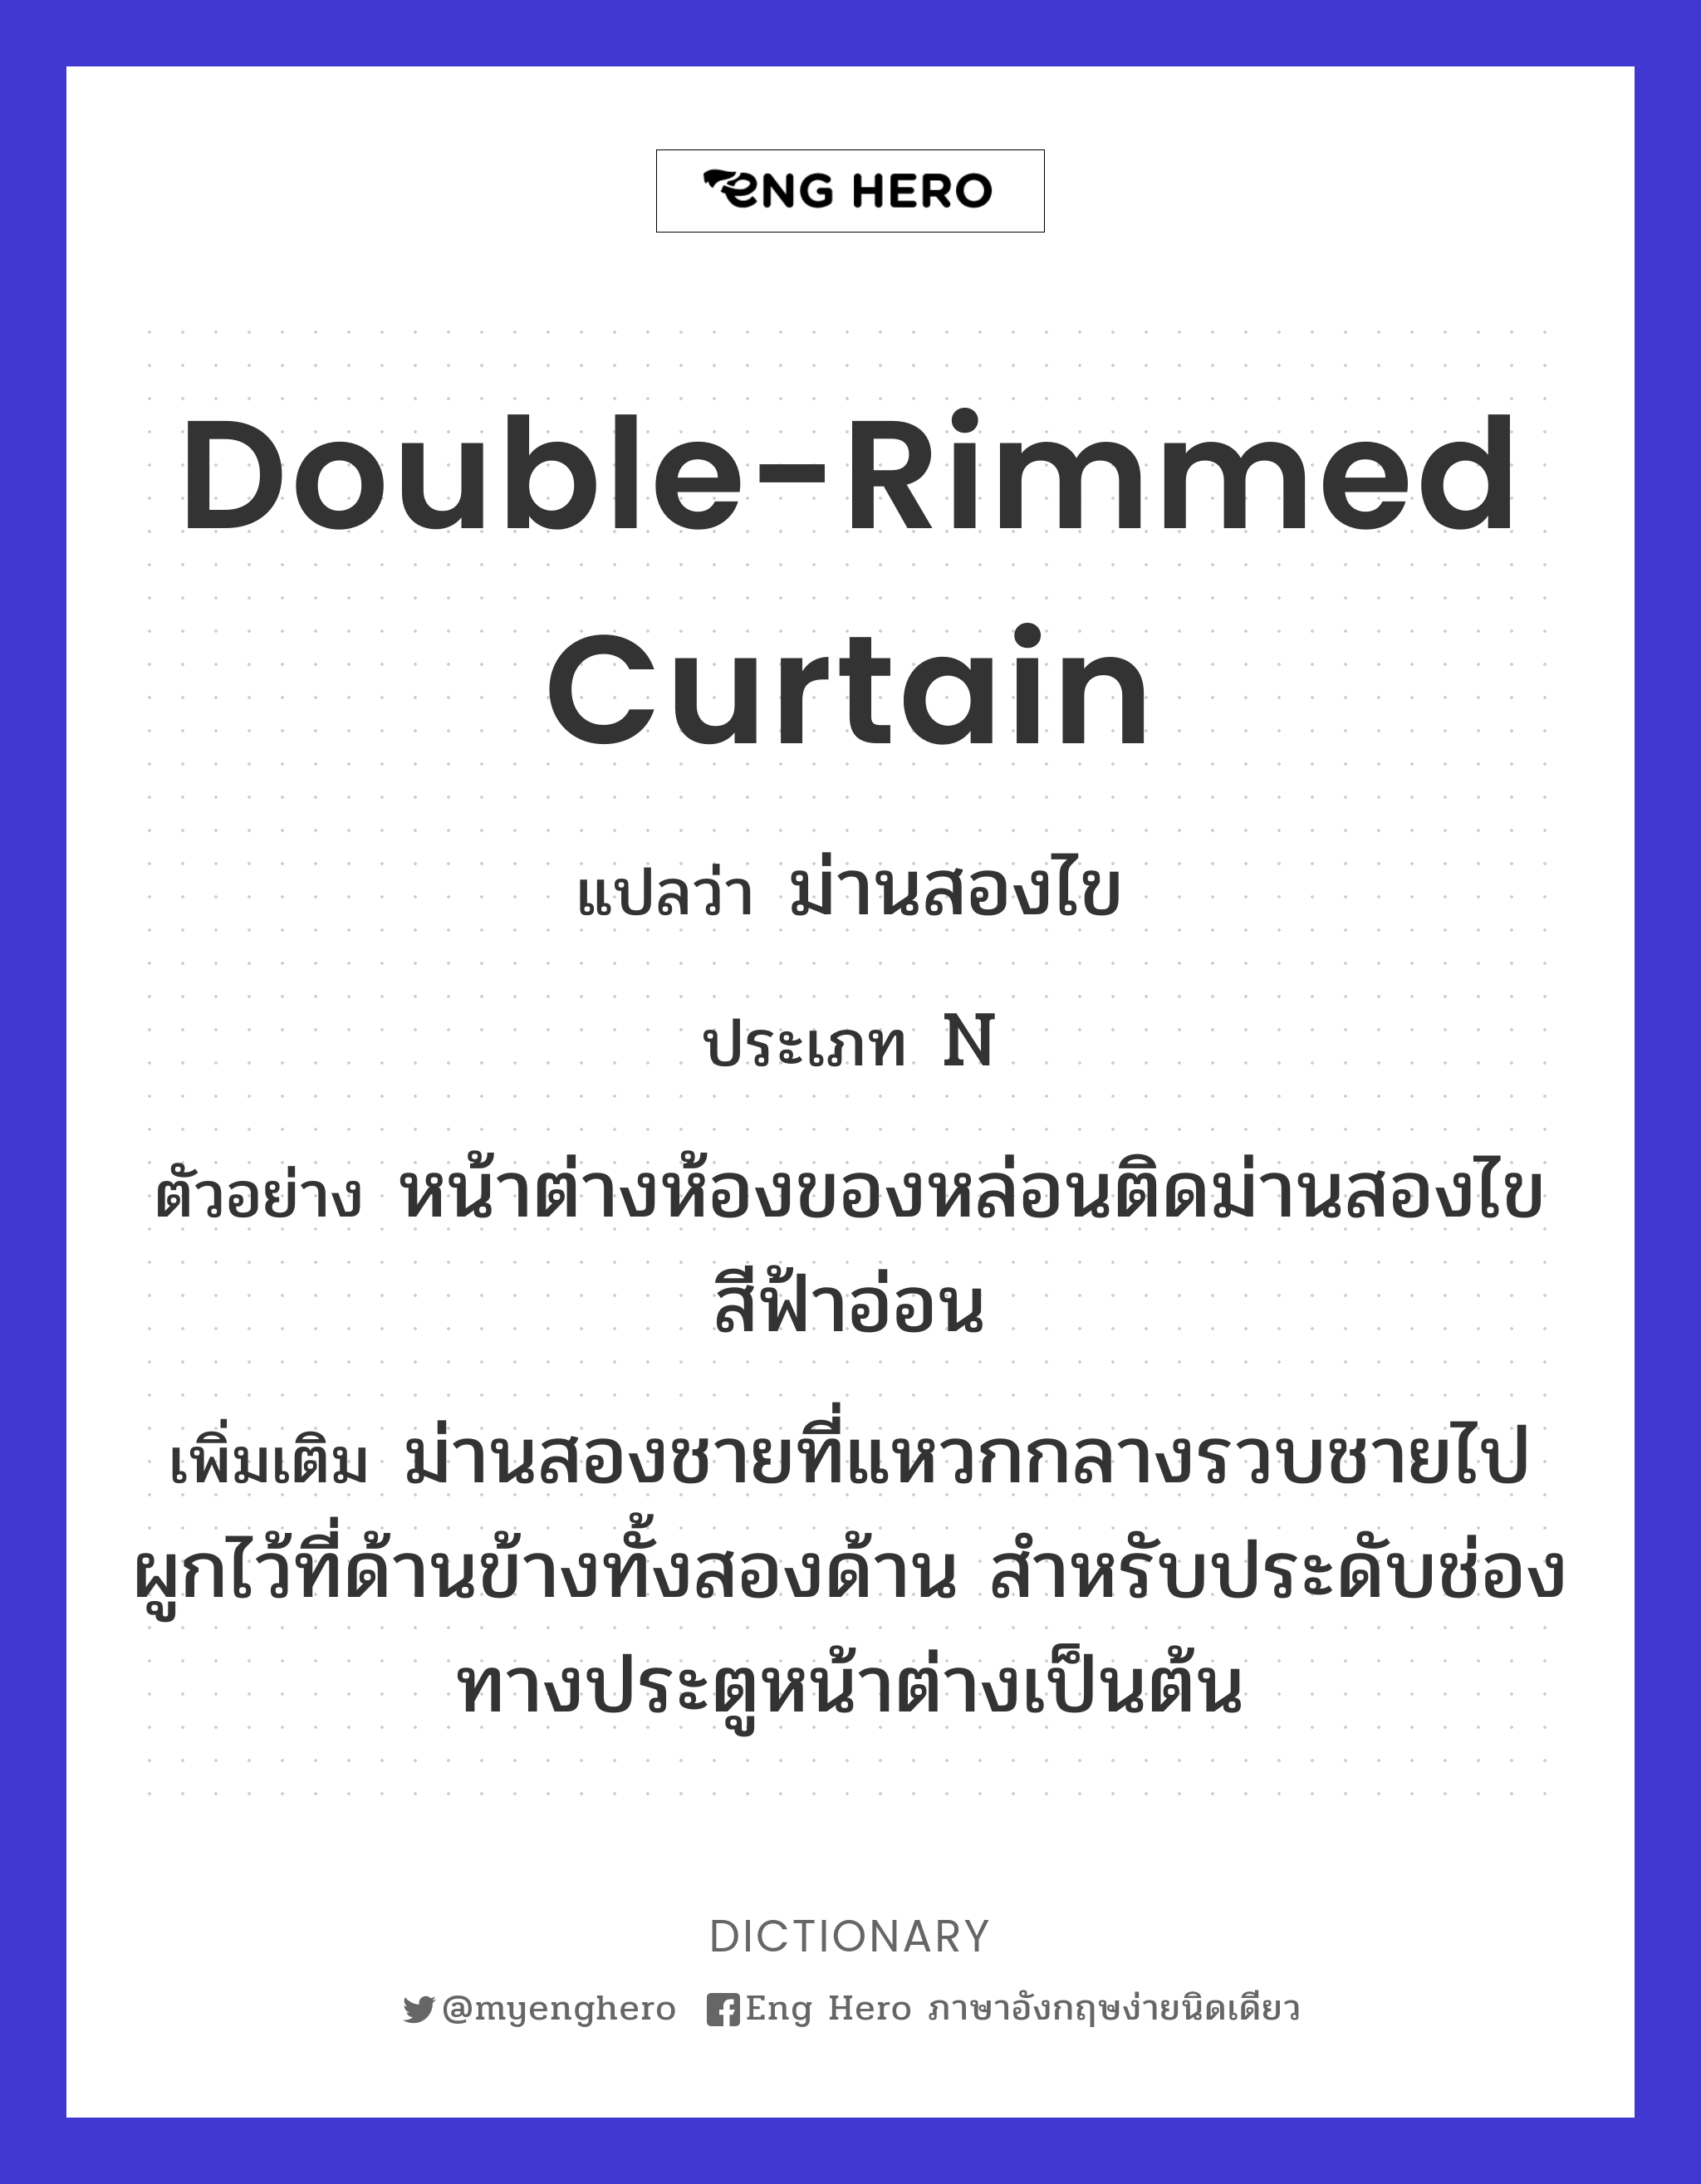 double-rimmed curtain